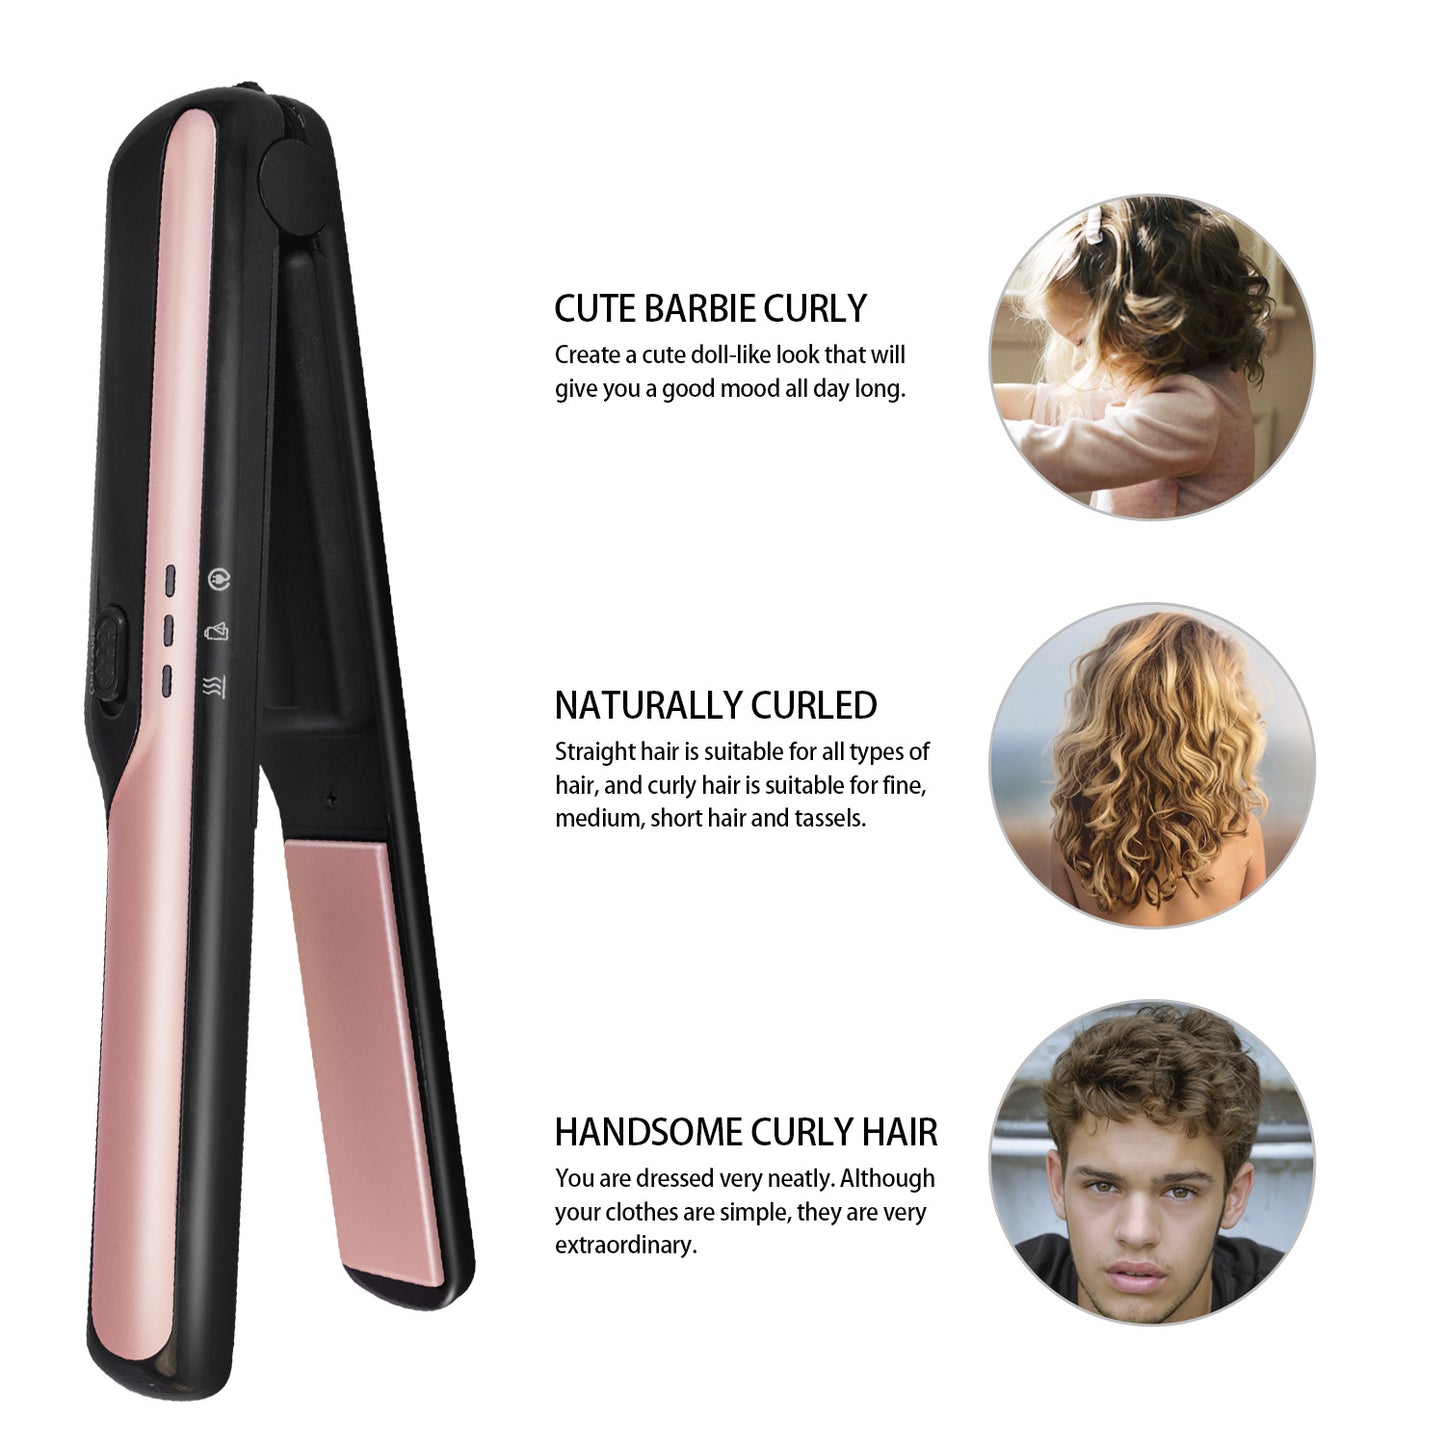 Illuminate Your Style with the Radiant USB Wireless Charging Hair Straightener